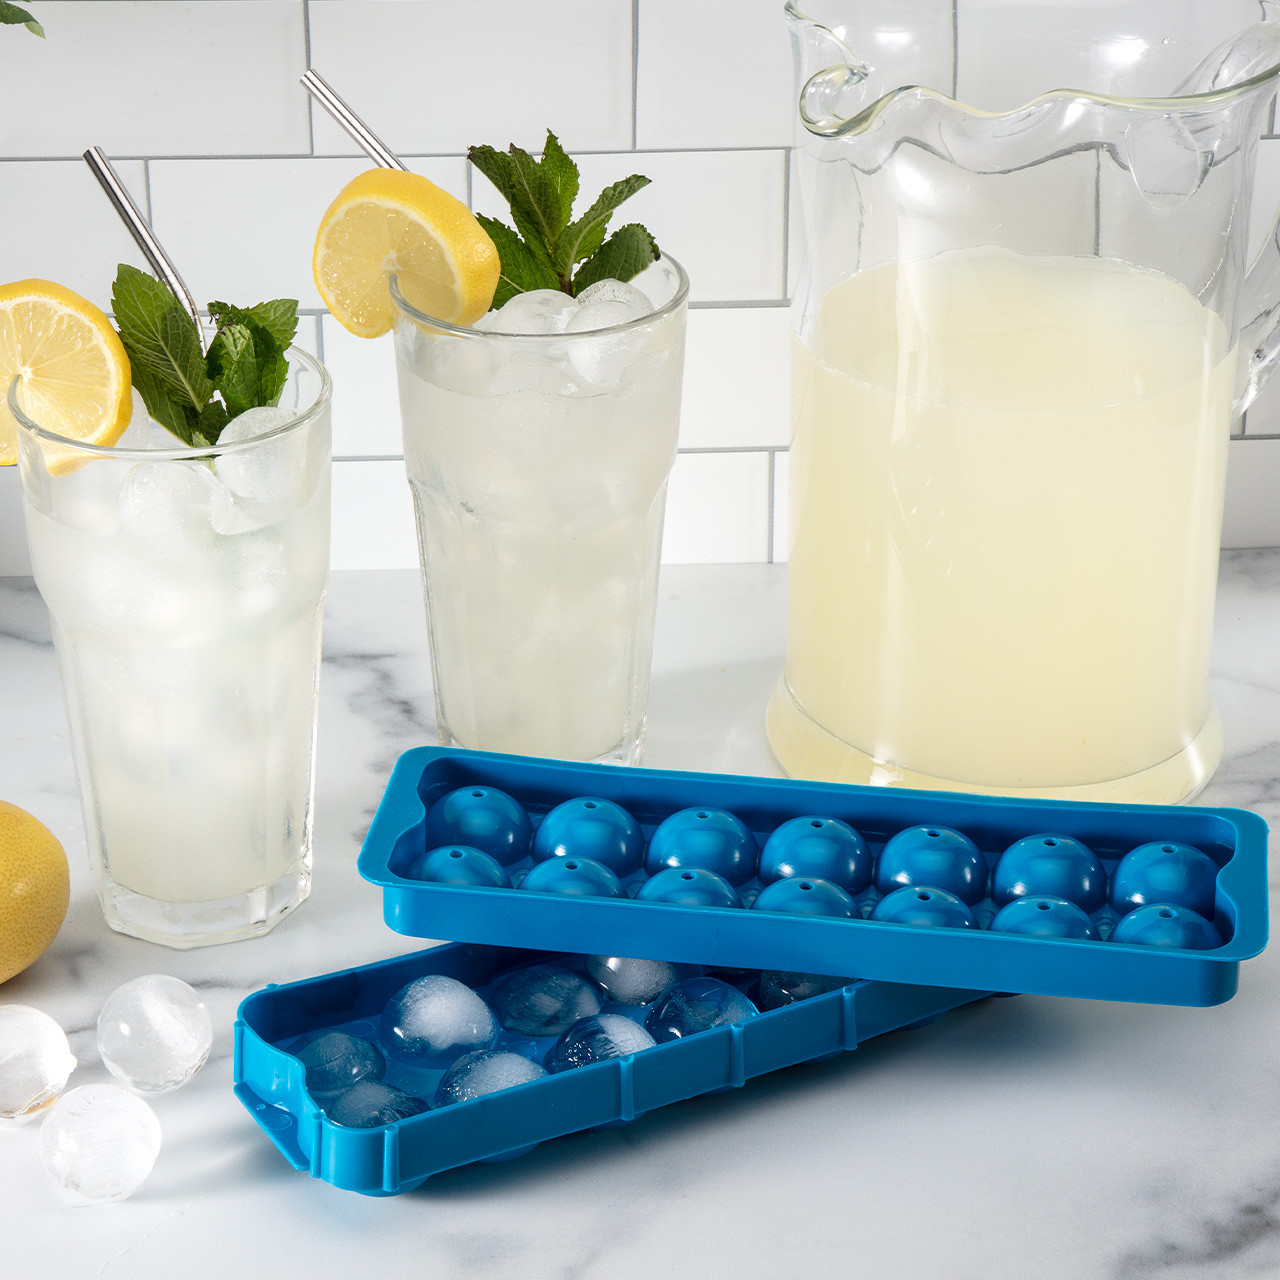 Ice Ball Tray - Cutler's Ice Ball Tray for perfectly round ice balls